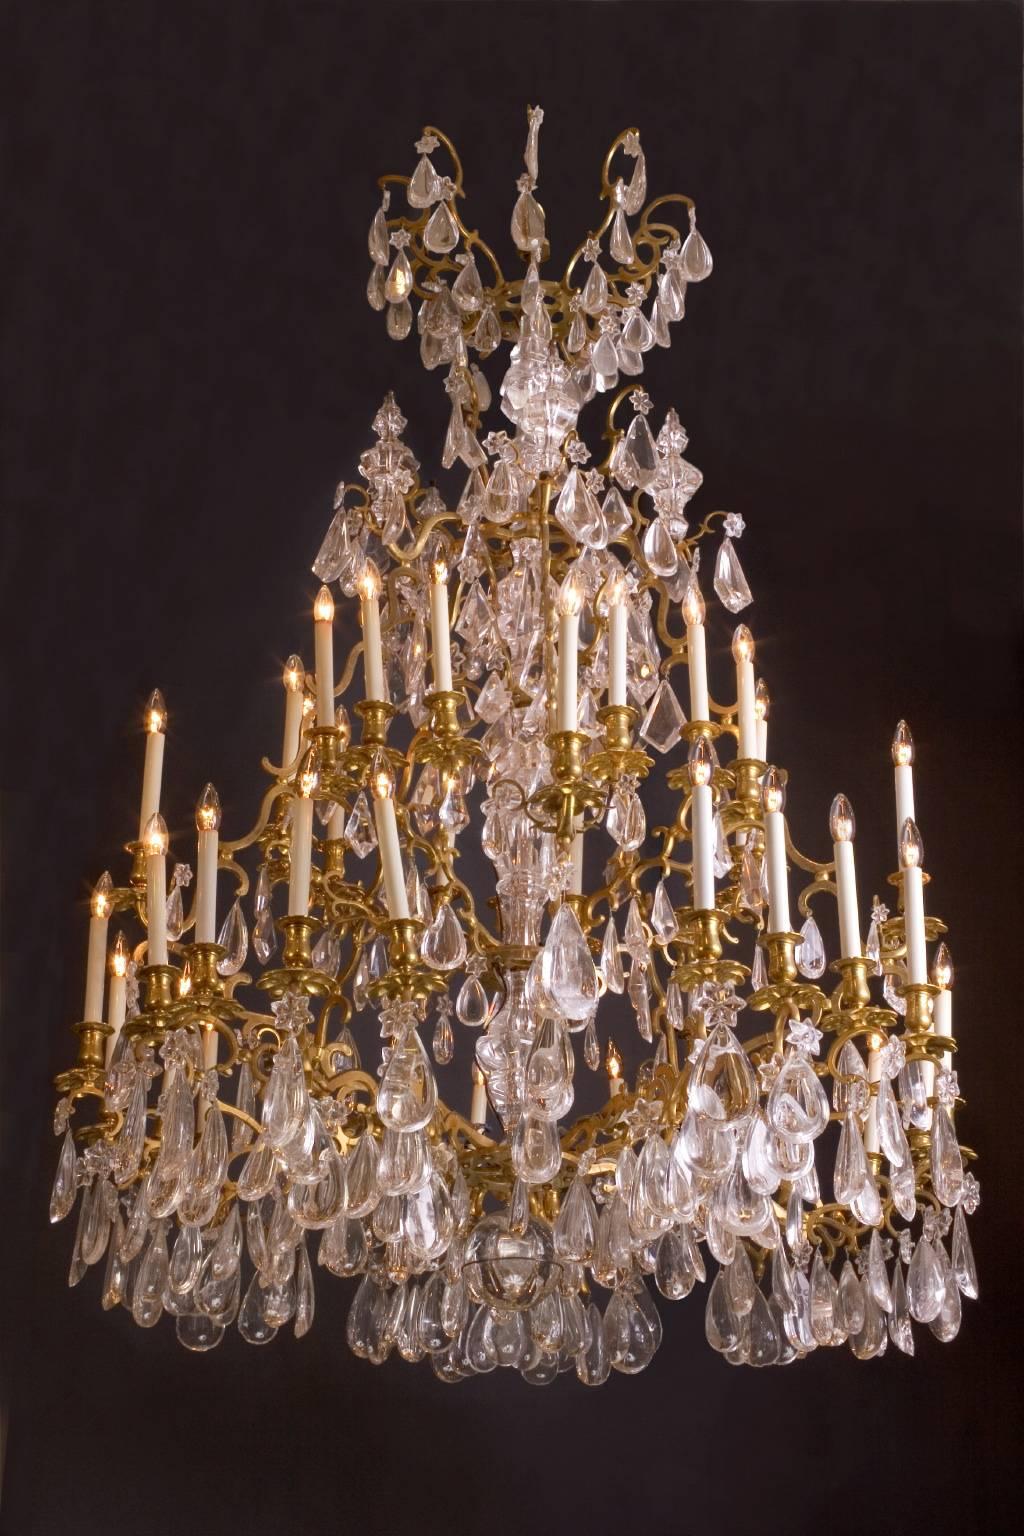 This absolutely magnificent chandelier was made in the 19th century from bronze doré and exquisitely clear rock crystal. Rock crystal is made from quartz mined from the ground, and is usually quite cloudy. The higher quality the rock crystal, the